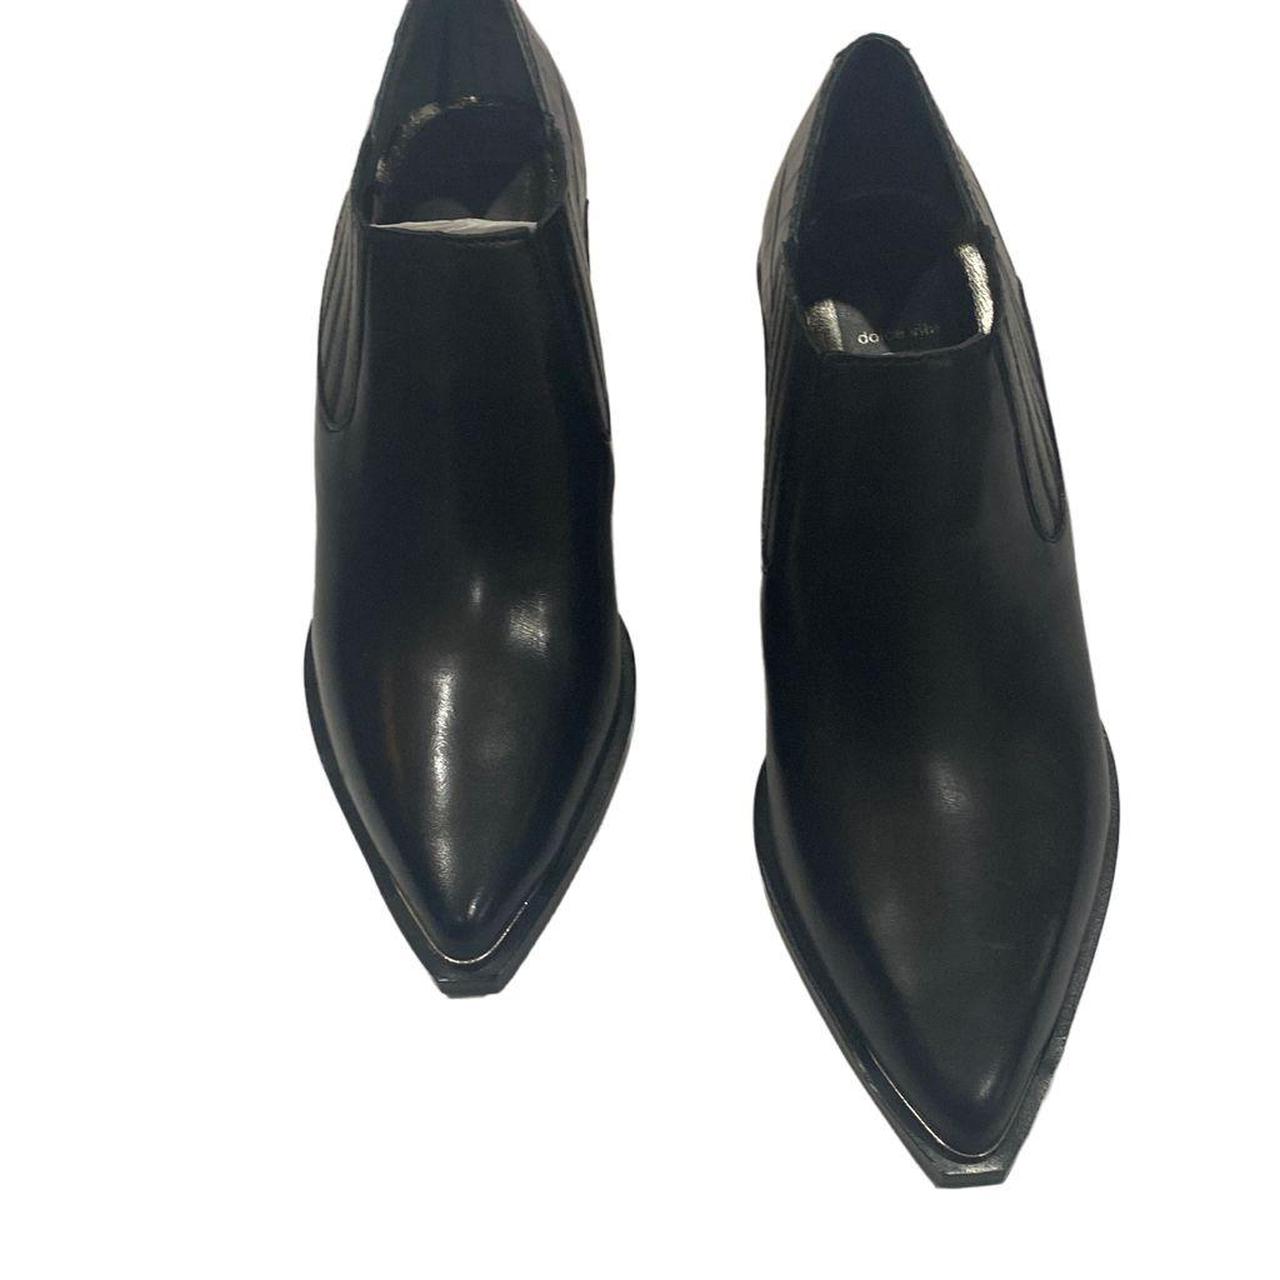 Product Image 1 - DOLCE VITA Women's Black Pointed